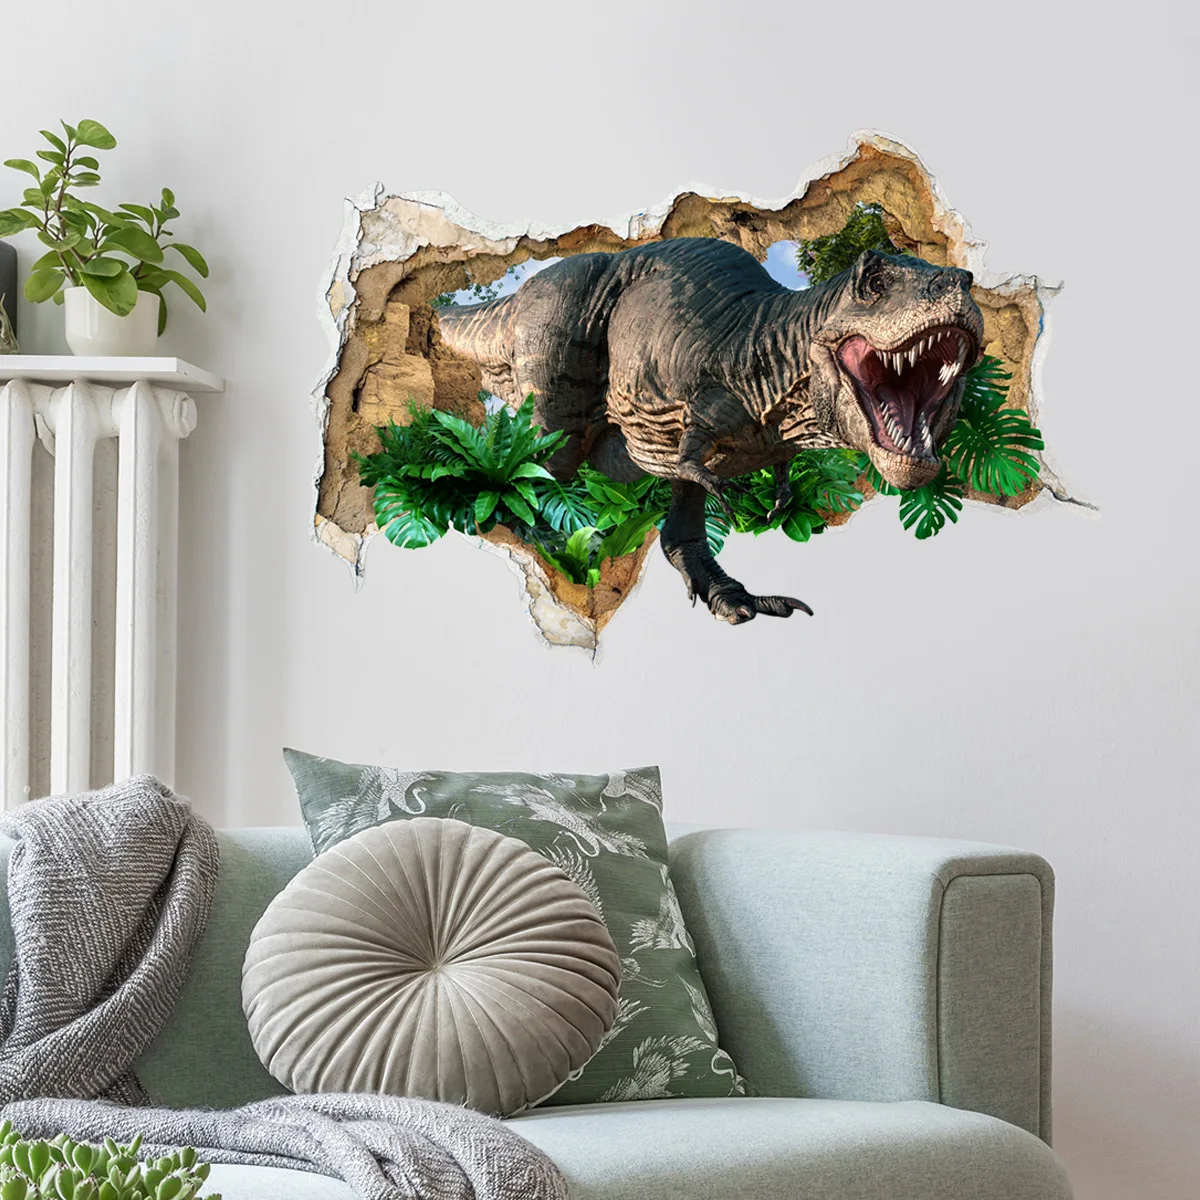 40*60cm Broken Wall Dinosaur Decorative Painting Wall Stickers Background Wall Home Decoration Wall Stickers Wallpaper Atw6009 new design 12pcs 3d wall panels home decoration 3d wall sticker living room apartment 3d self adhesive wallpaper